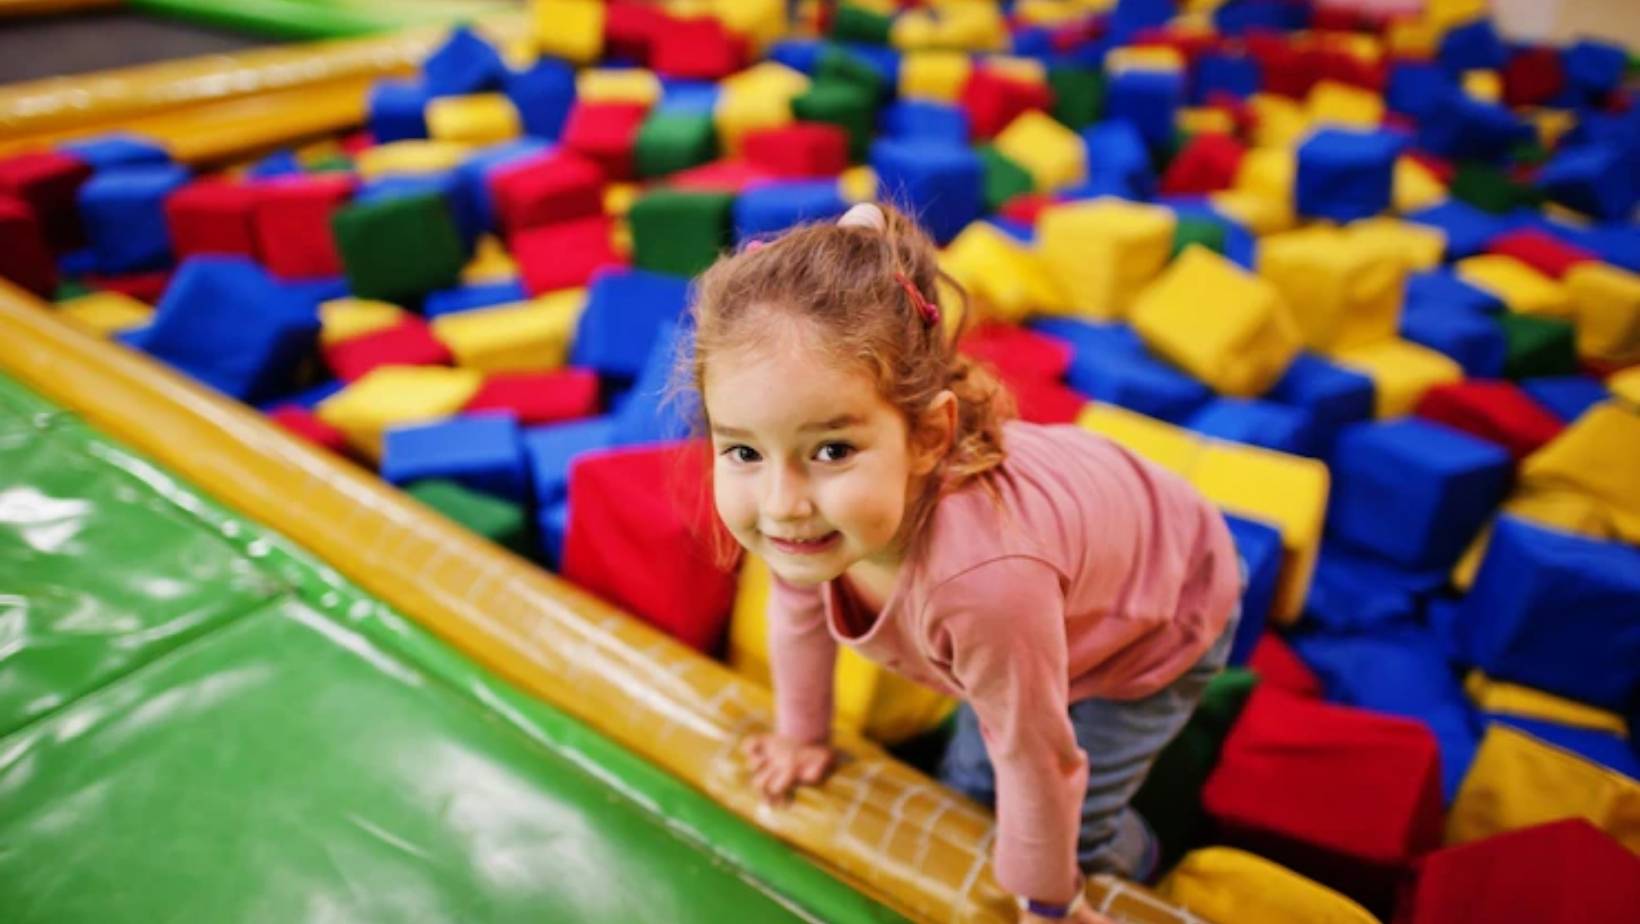 INDOOR ACTIVITIES FOR KIDS AND IT'S IMPORTANCE